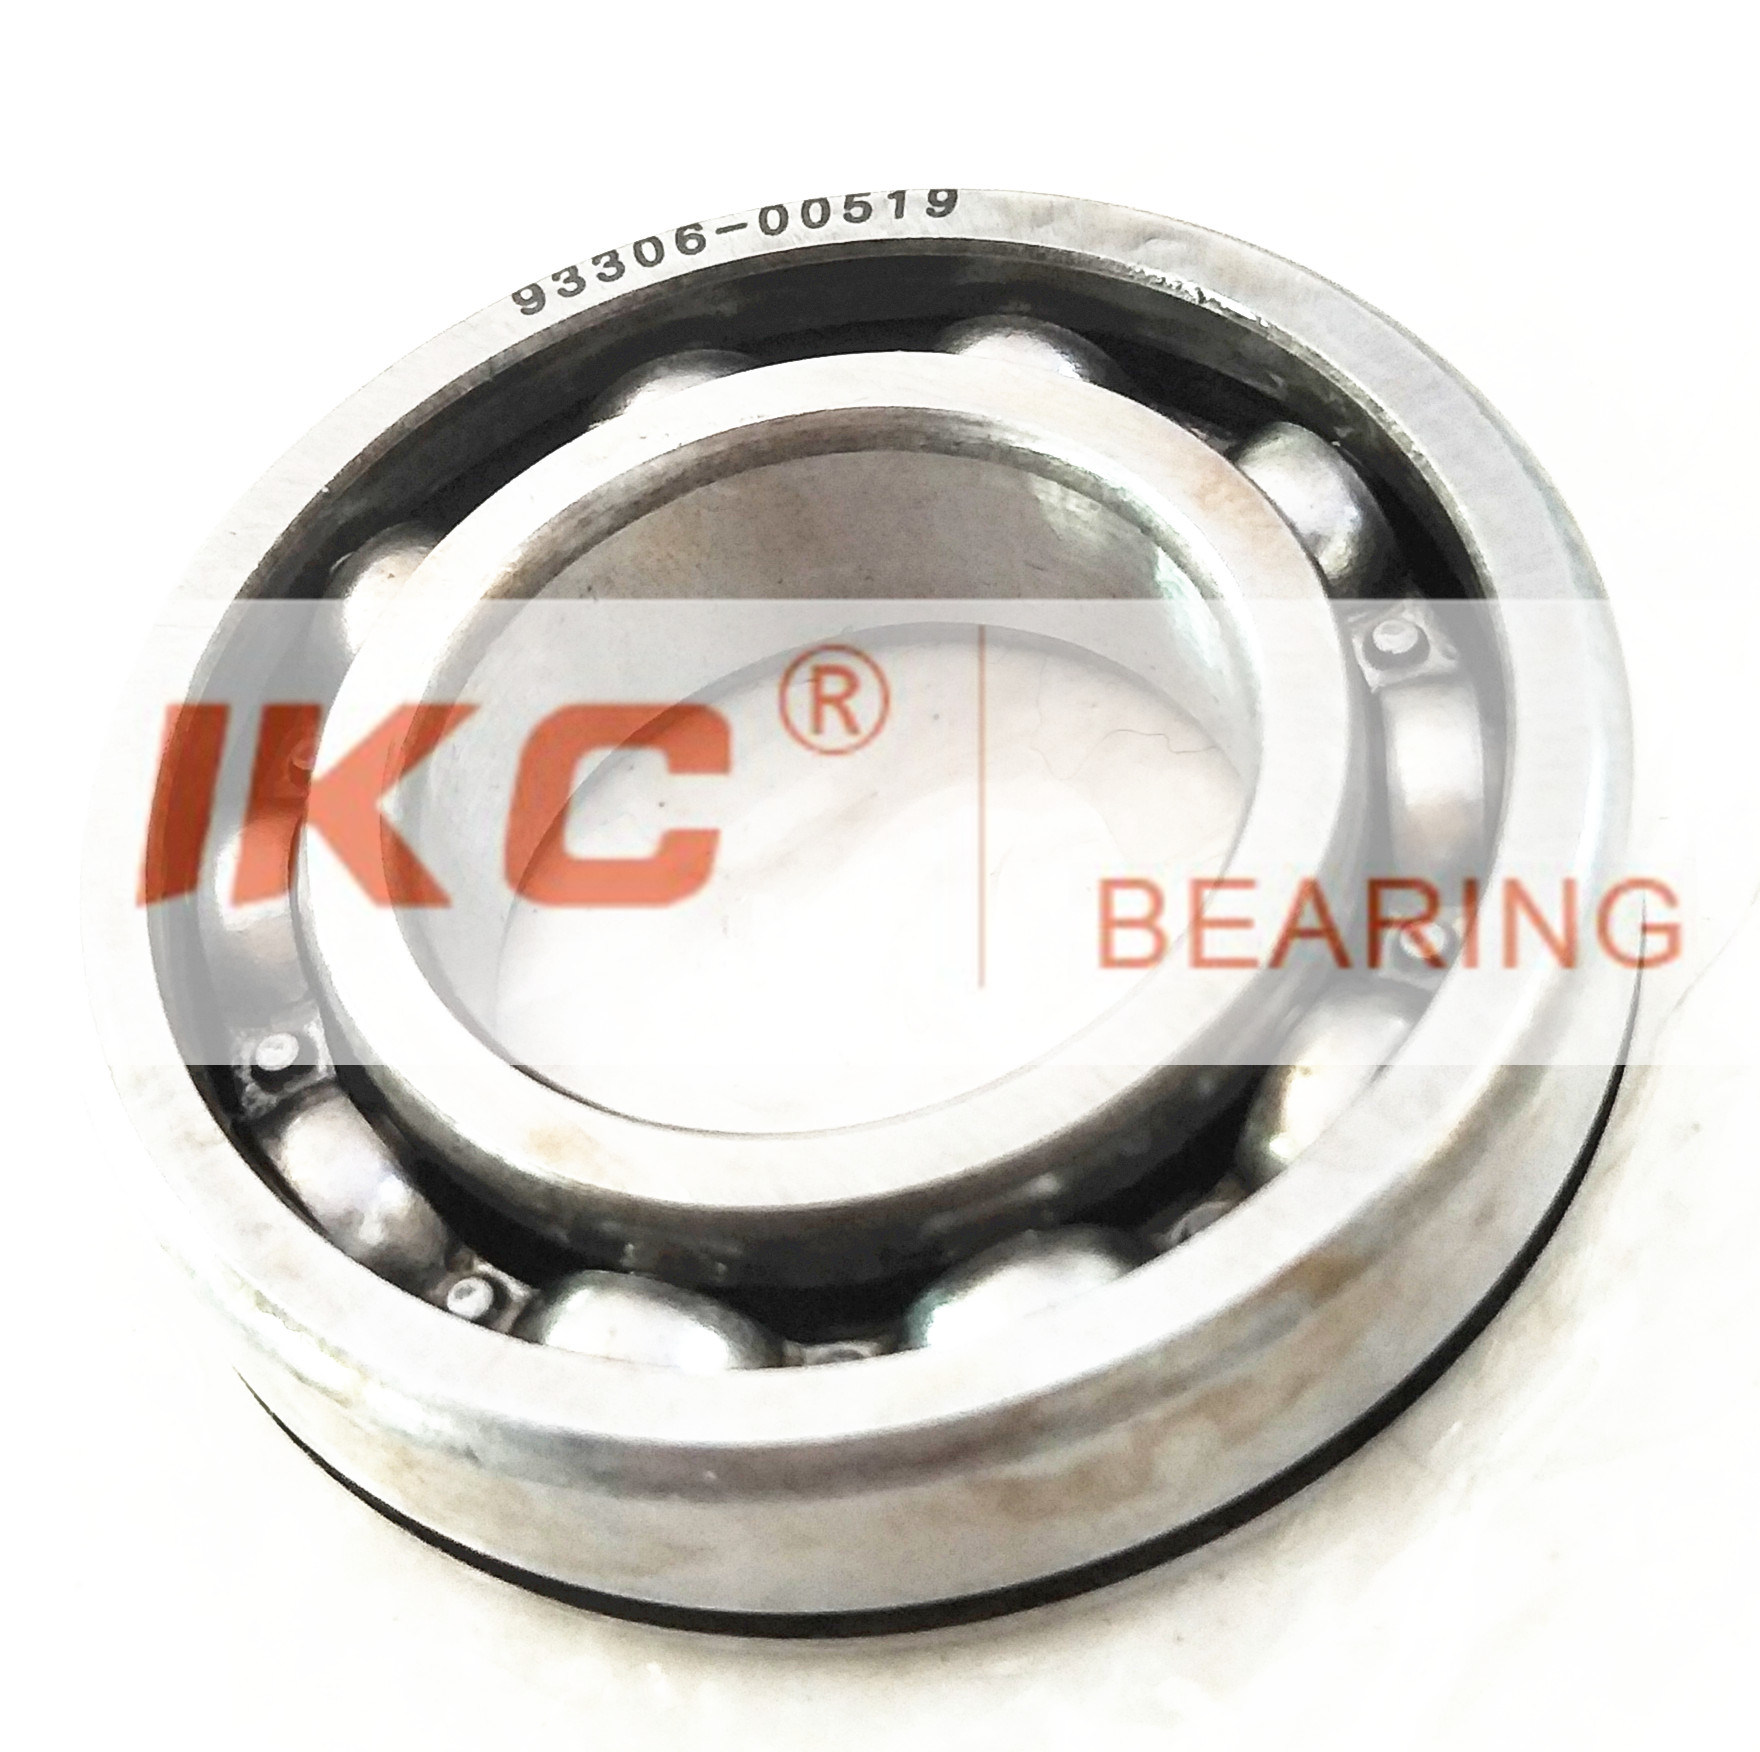 93306-00519 YAMAHA Outboard Spare Part Engine Bearing 9.9HP, 15HP, 20HP, 25HP, 30HP, 40HP, 48HP, 60HP, 70HP, 80HP, 100HP (93306-00519-00)